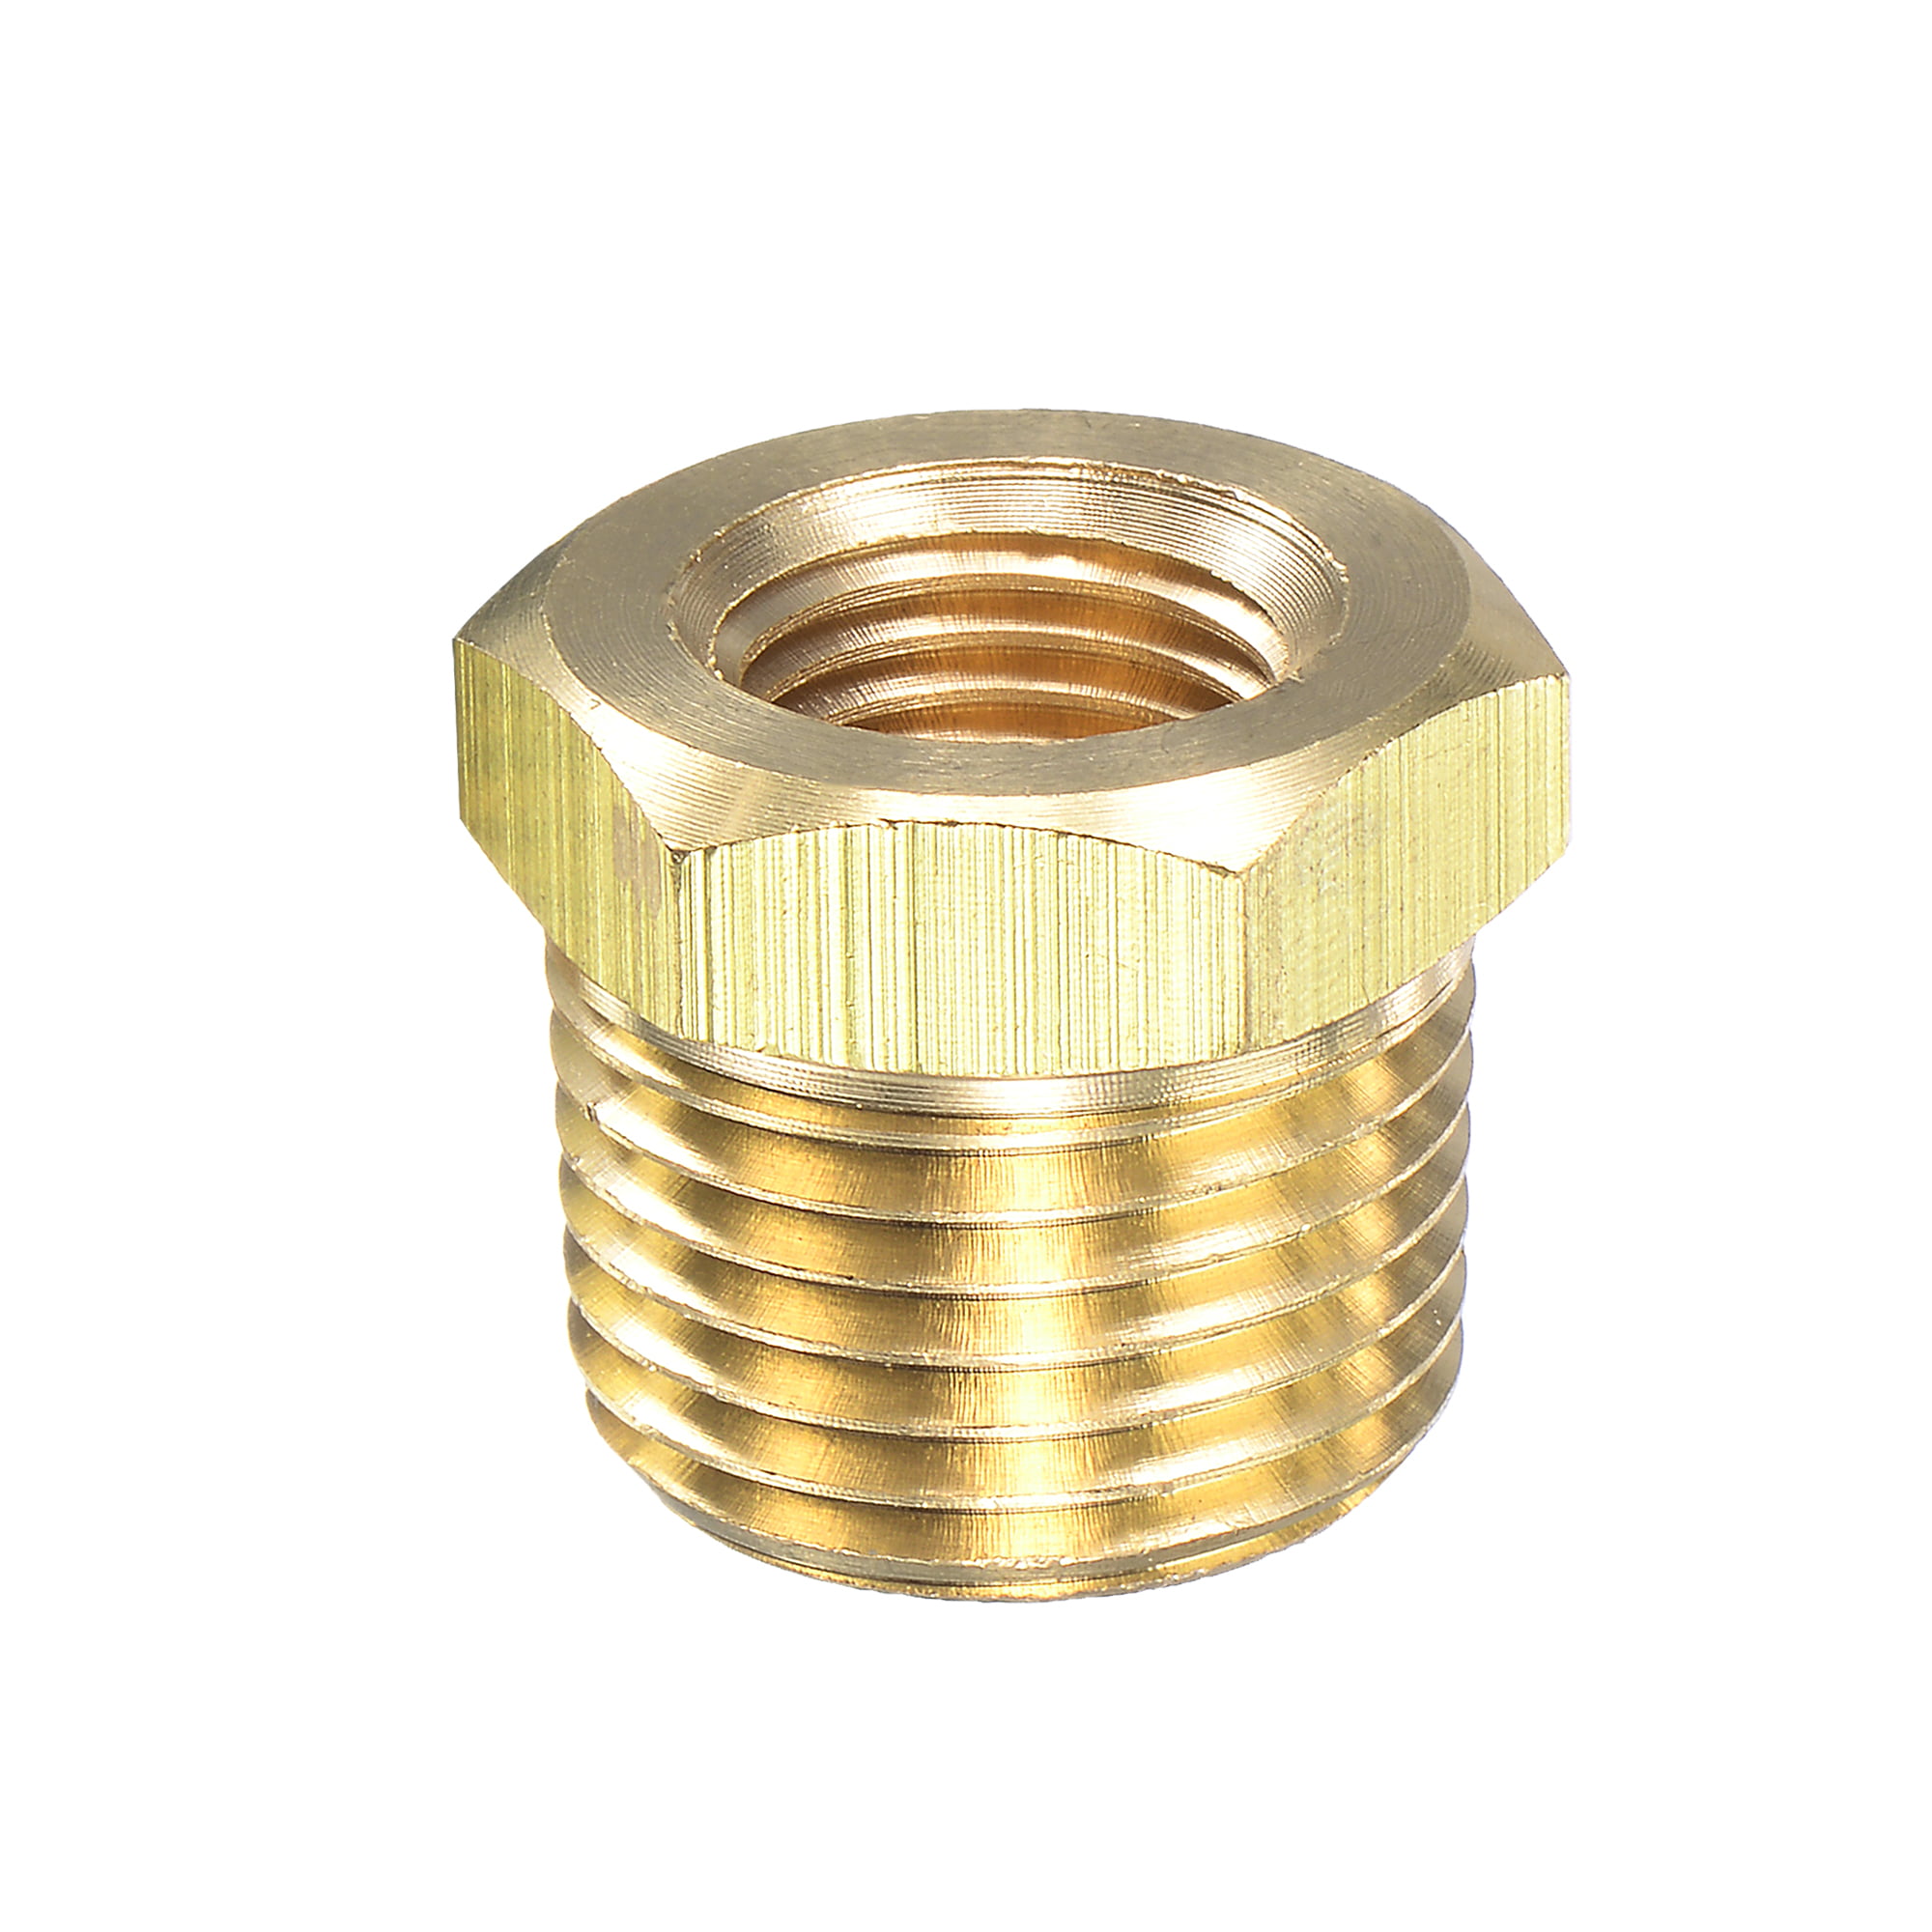 1/4" NPT Male x 1/8" NPT Female Reducing Bushing Brass Pipe Fitting Adapters 